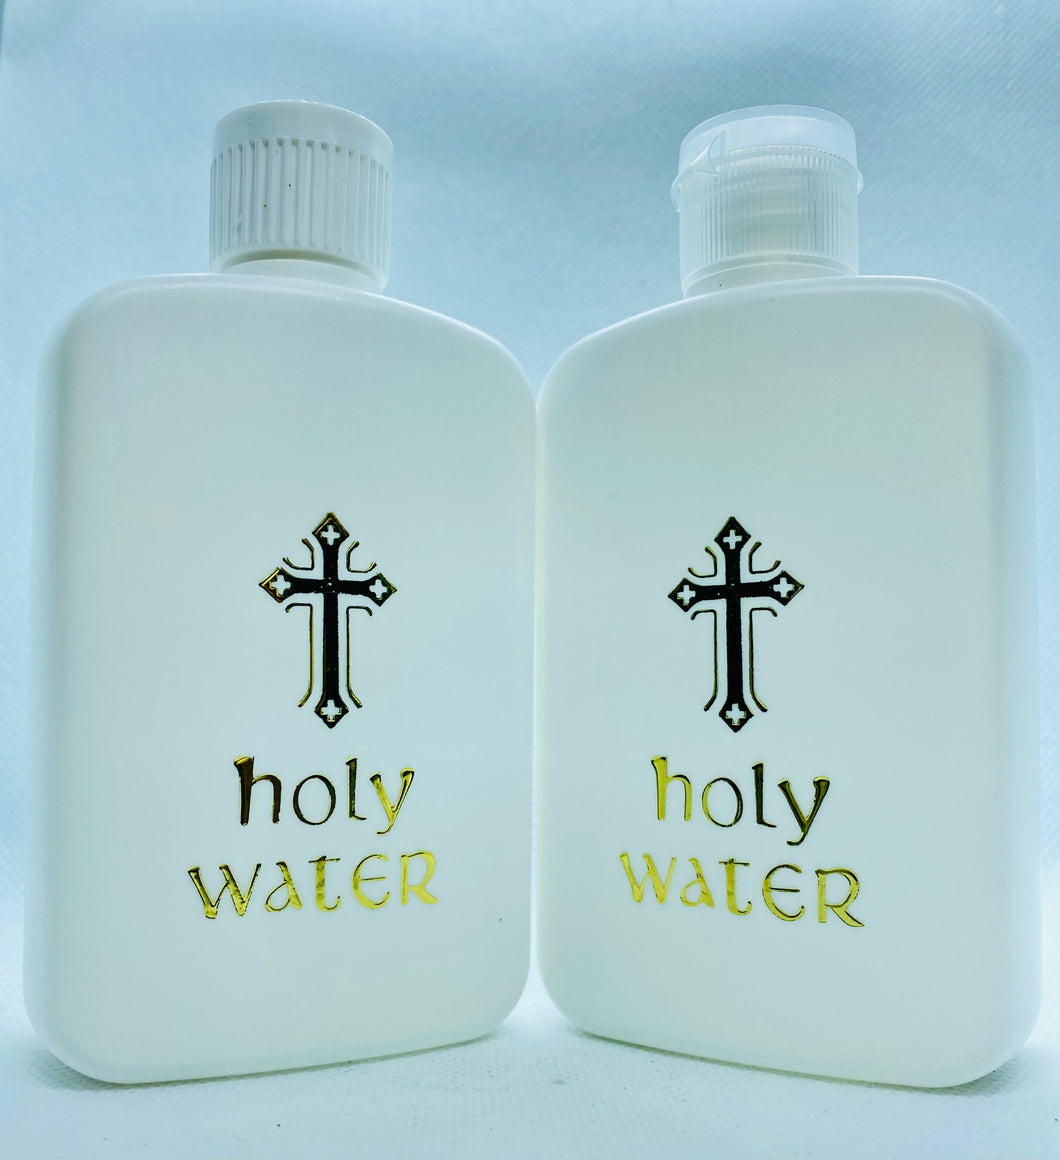 HOLY WATER (Mecca river)